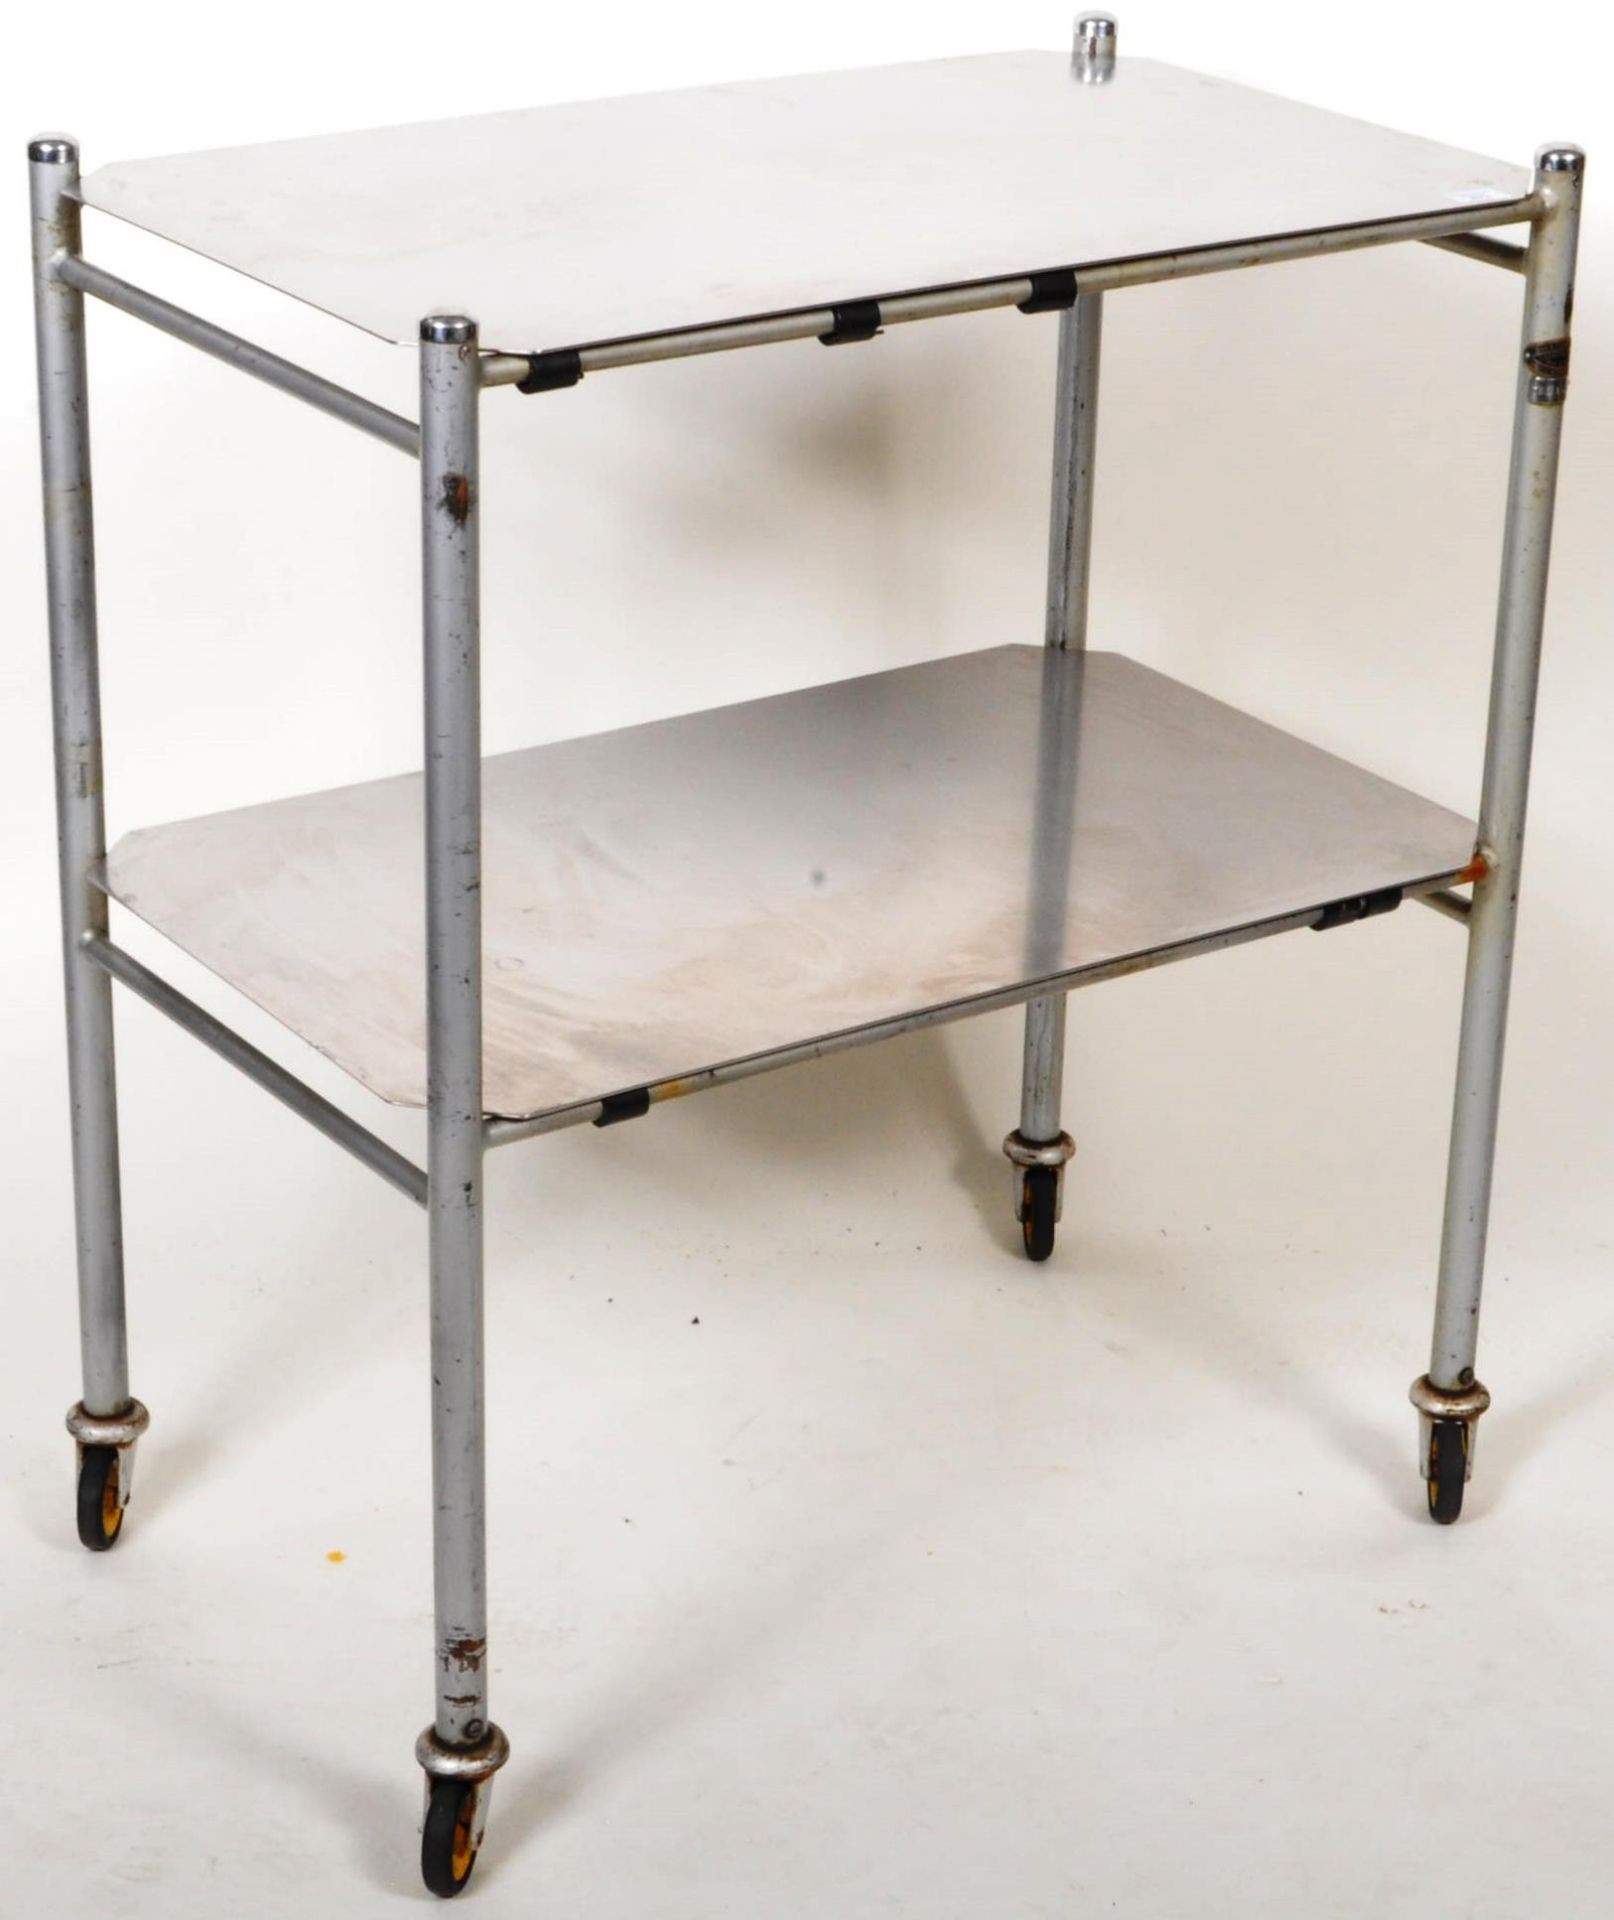 CHAS F. THACKRAY MID CENTURY MEDICAL TWO TIER TROLLEY - Image 2 of 4